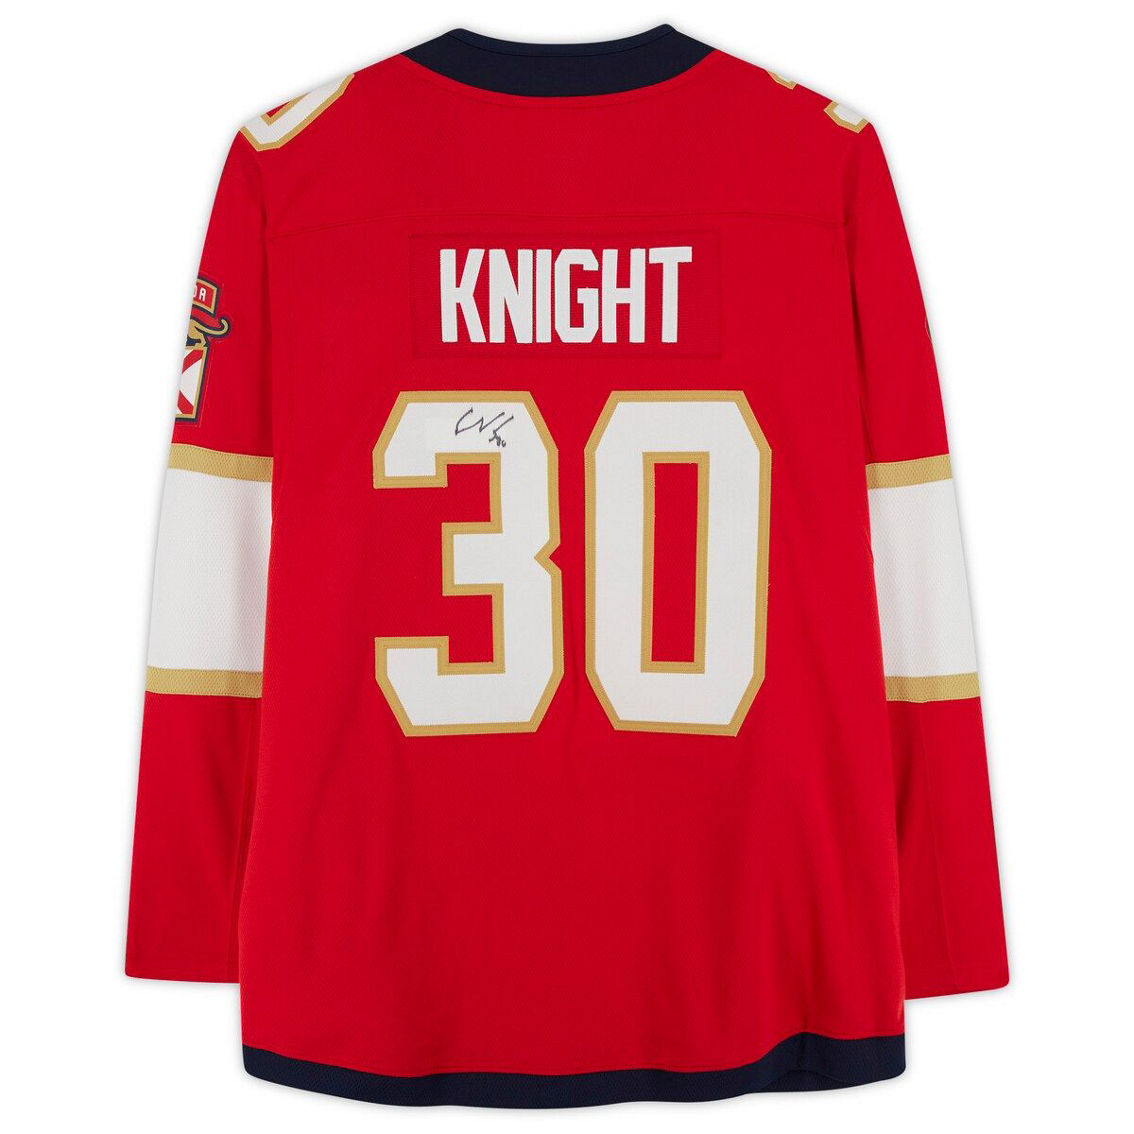 Fanatics Authentic Spencer Knight Red Florida Panthers Autographed Fanatics Breakaway Jersey - Image 3 of 4